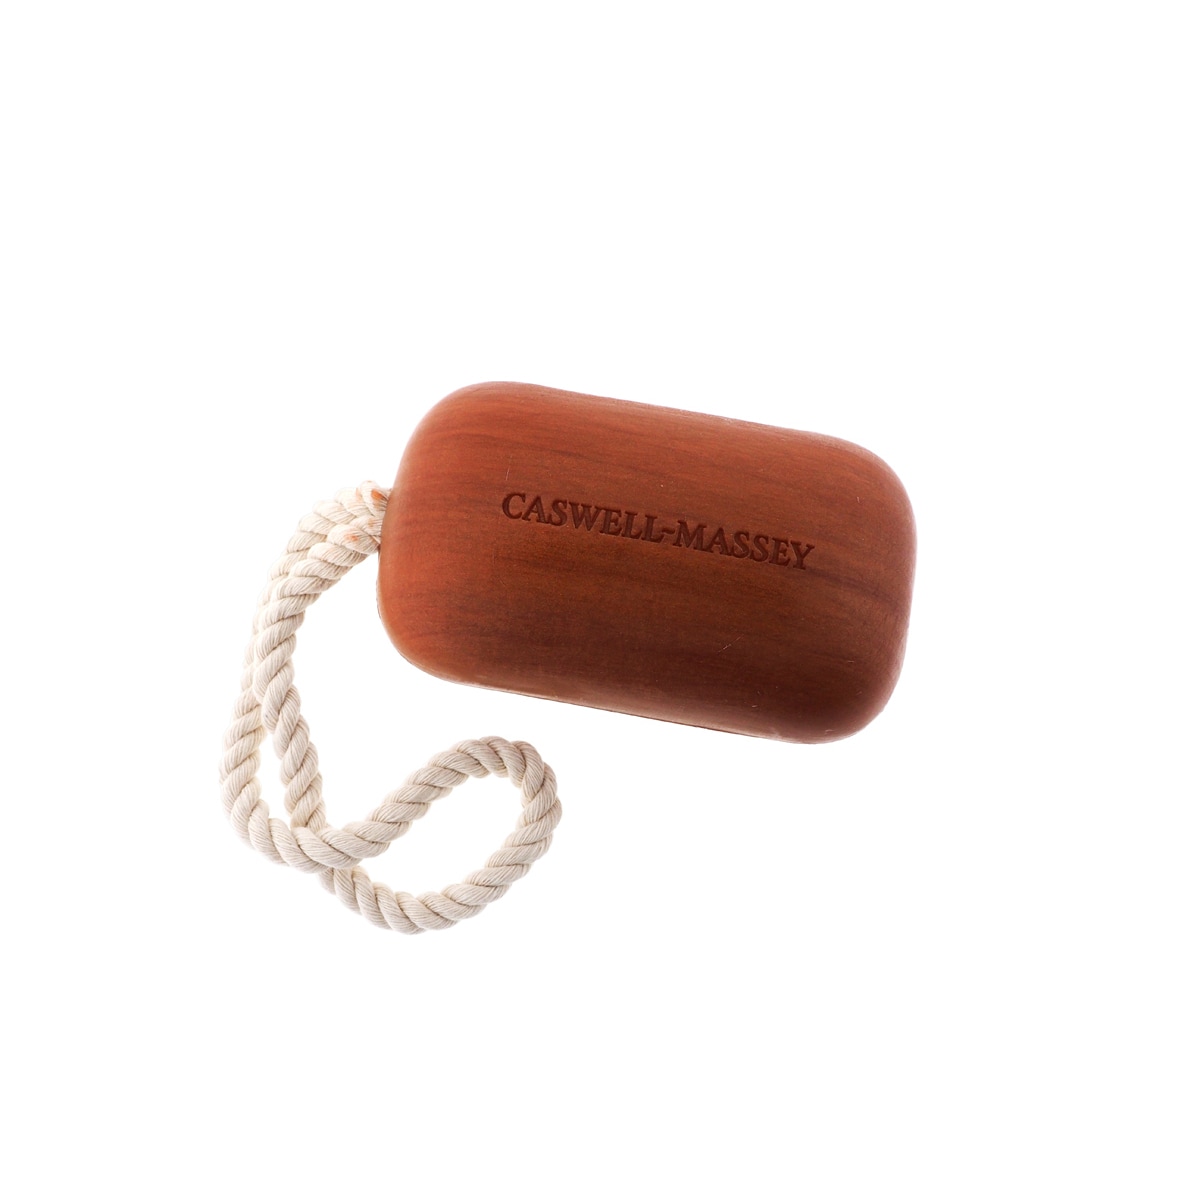 soap on a rope for men old spice